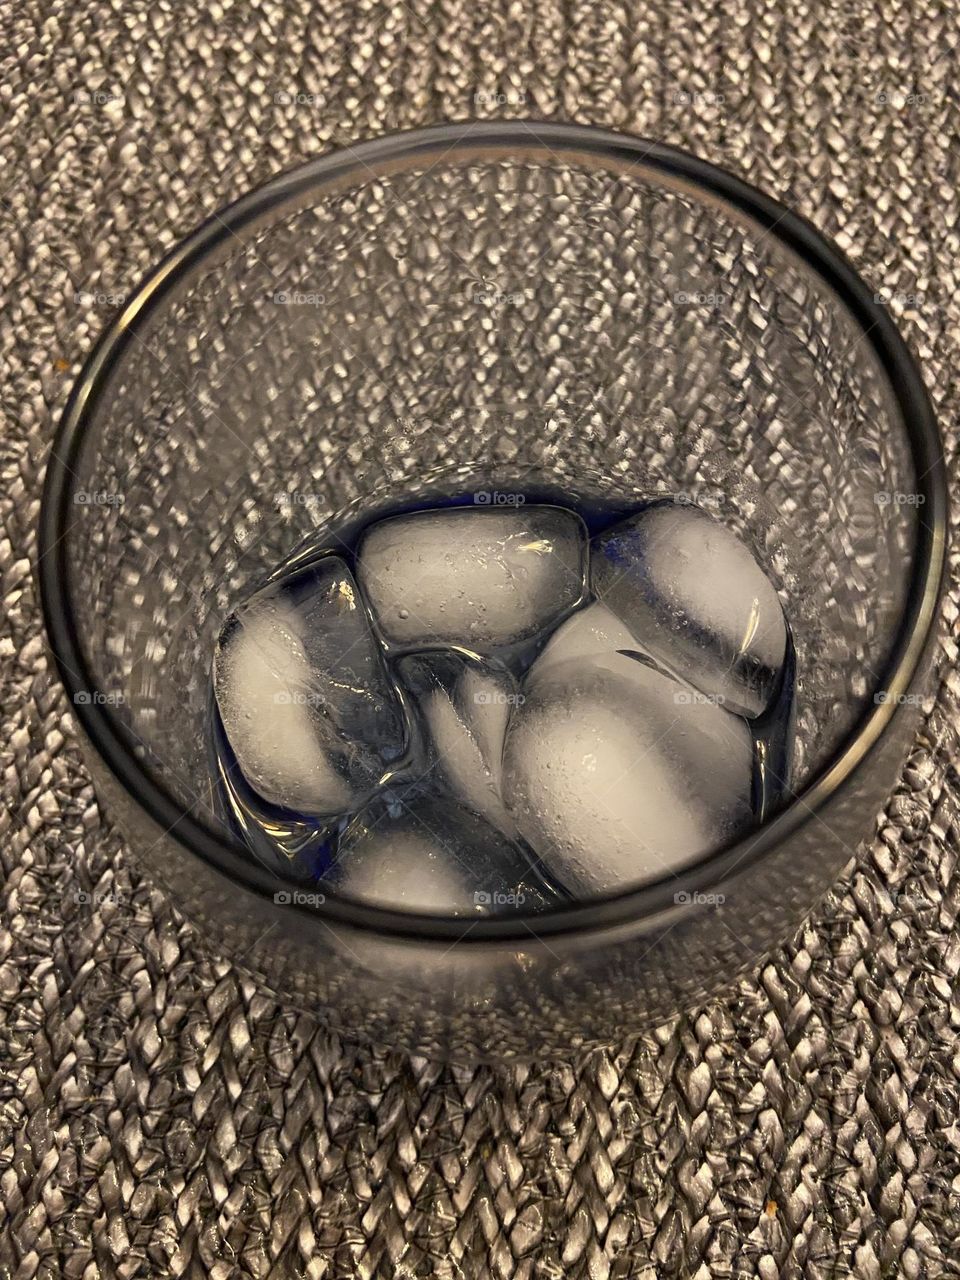 Ice cubes (aka frozen water) melting in a gray-tinted glass sitting on a woven gray placemat. 